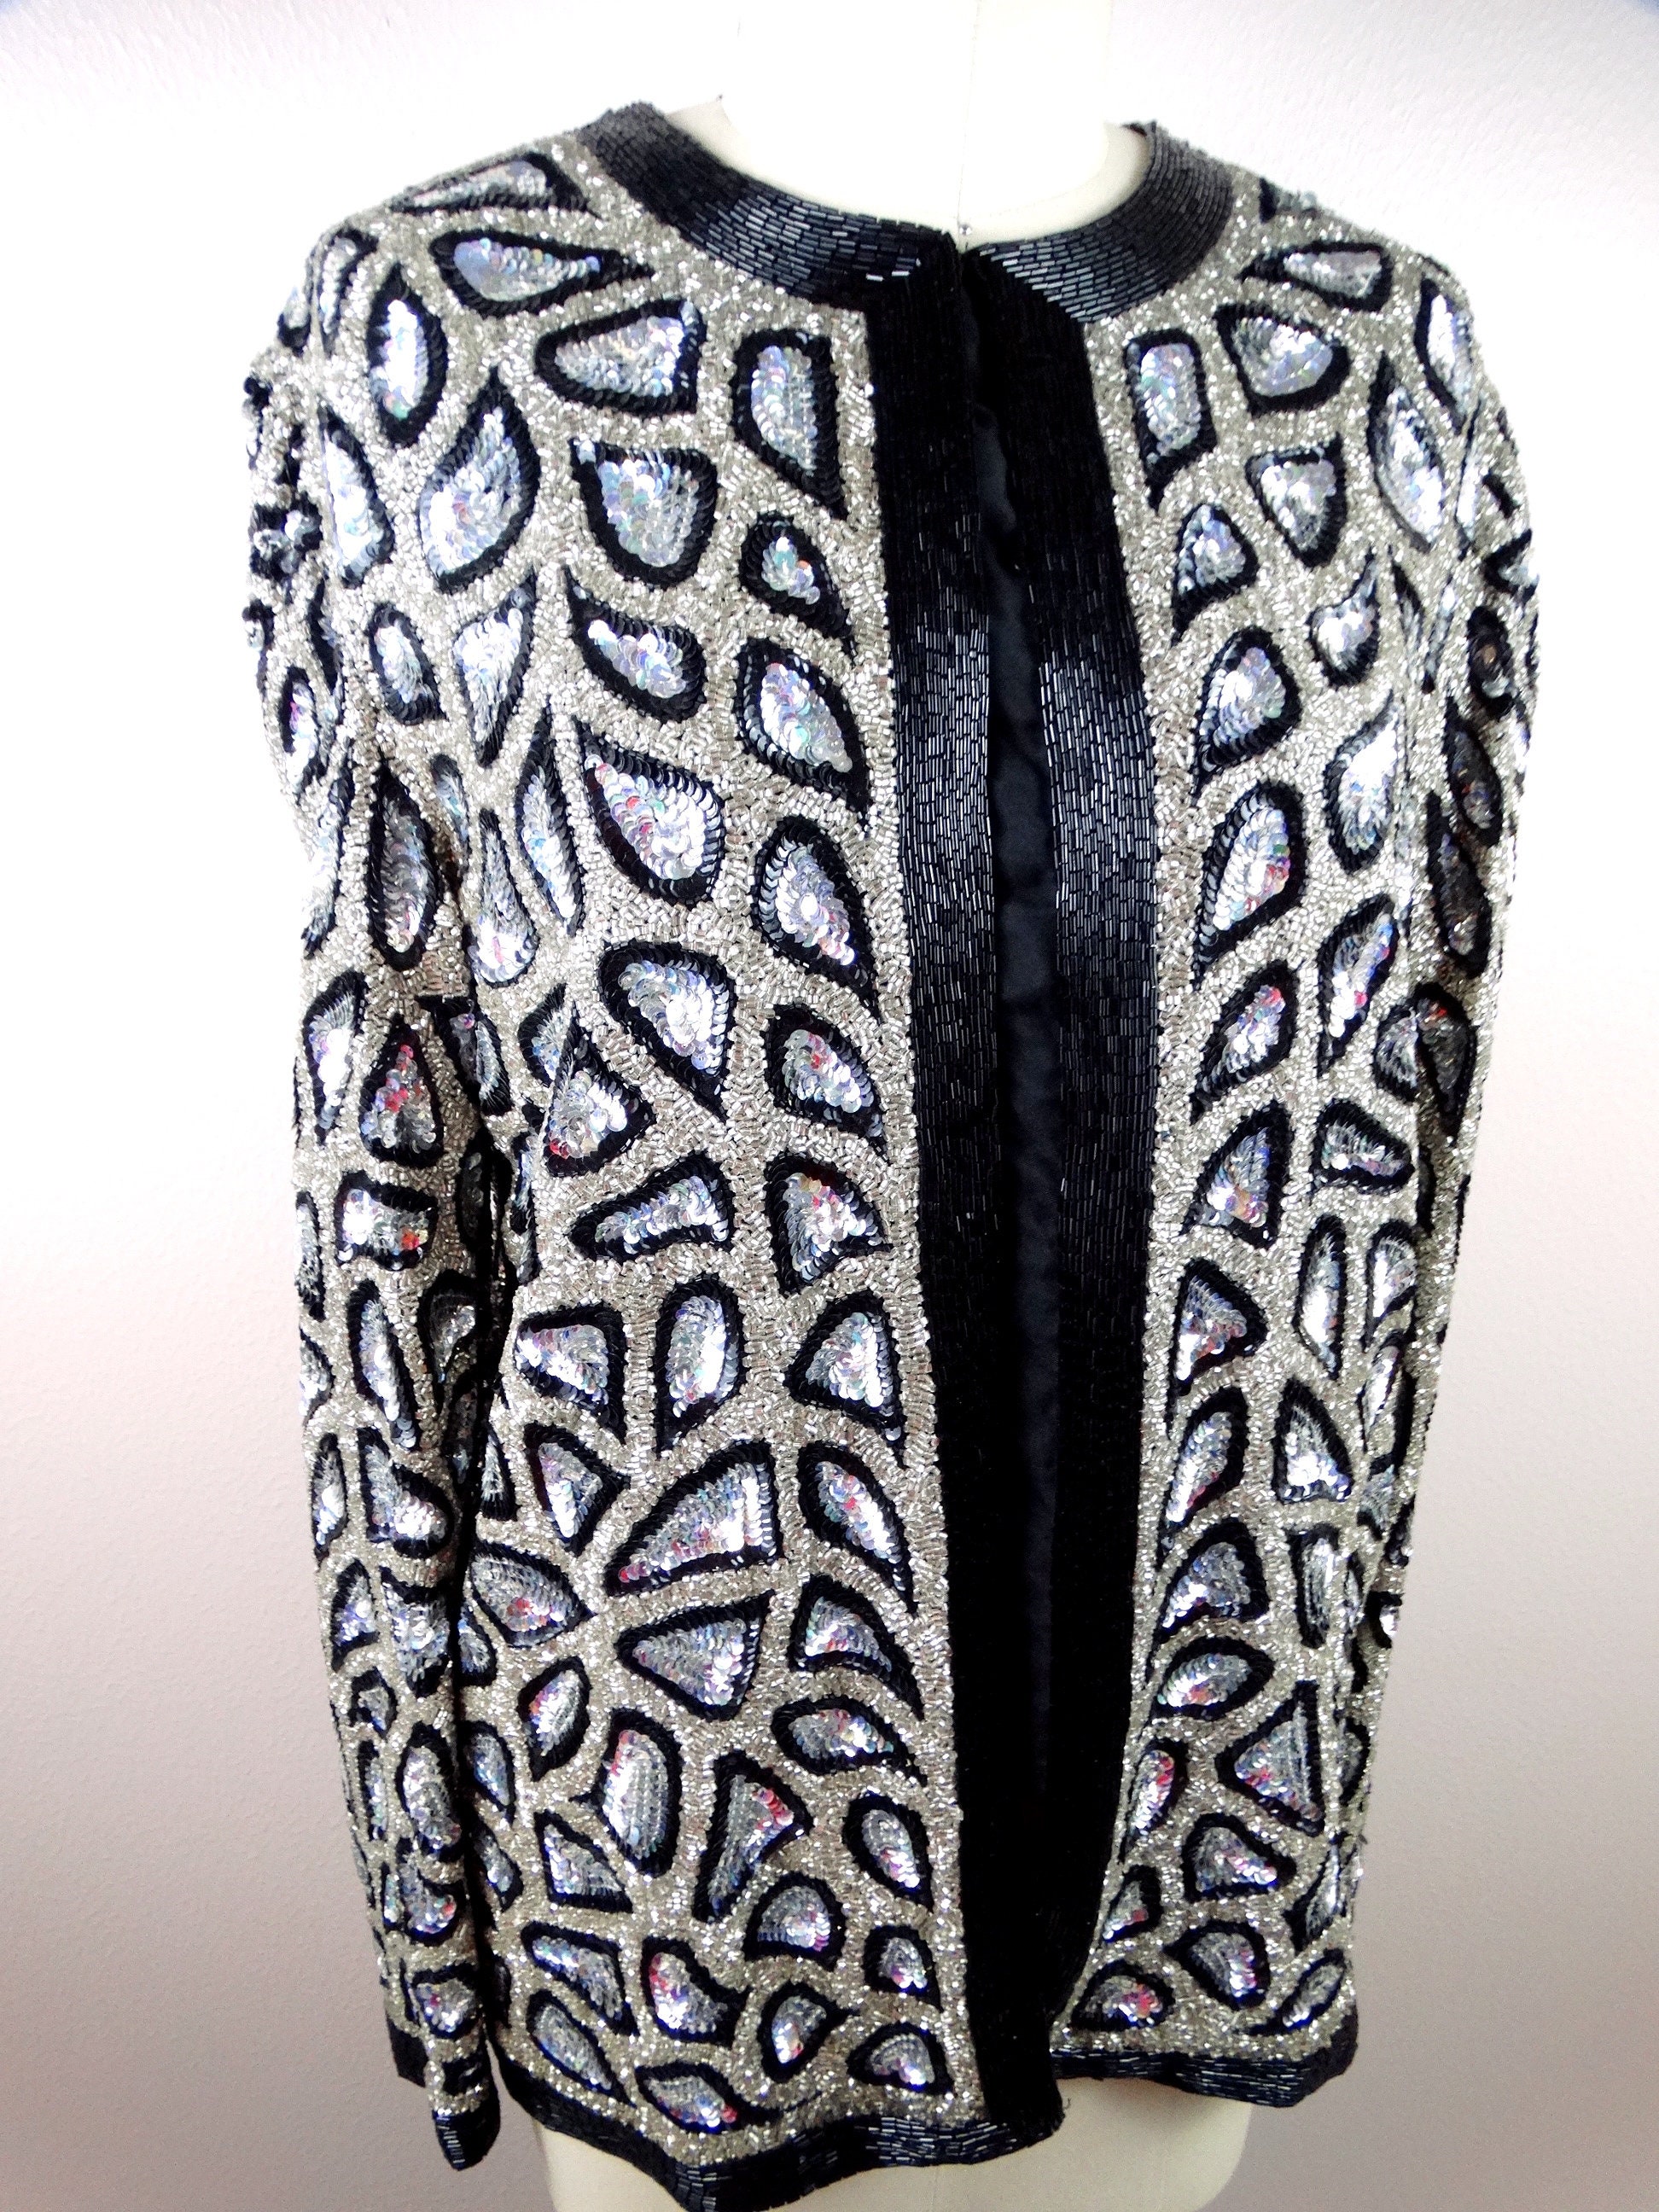 Incredible hand beaded @louisvuitton iridescent jacket from